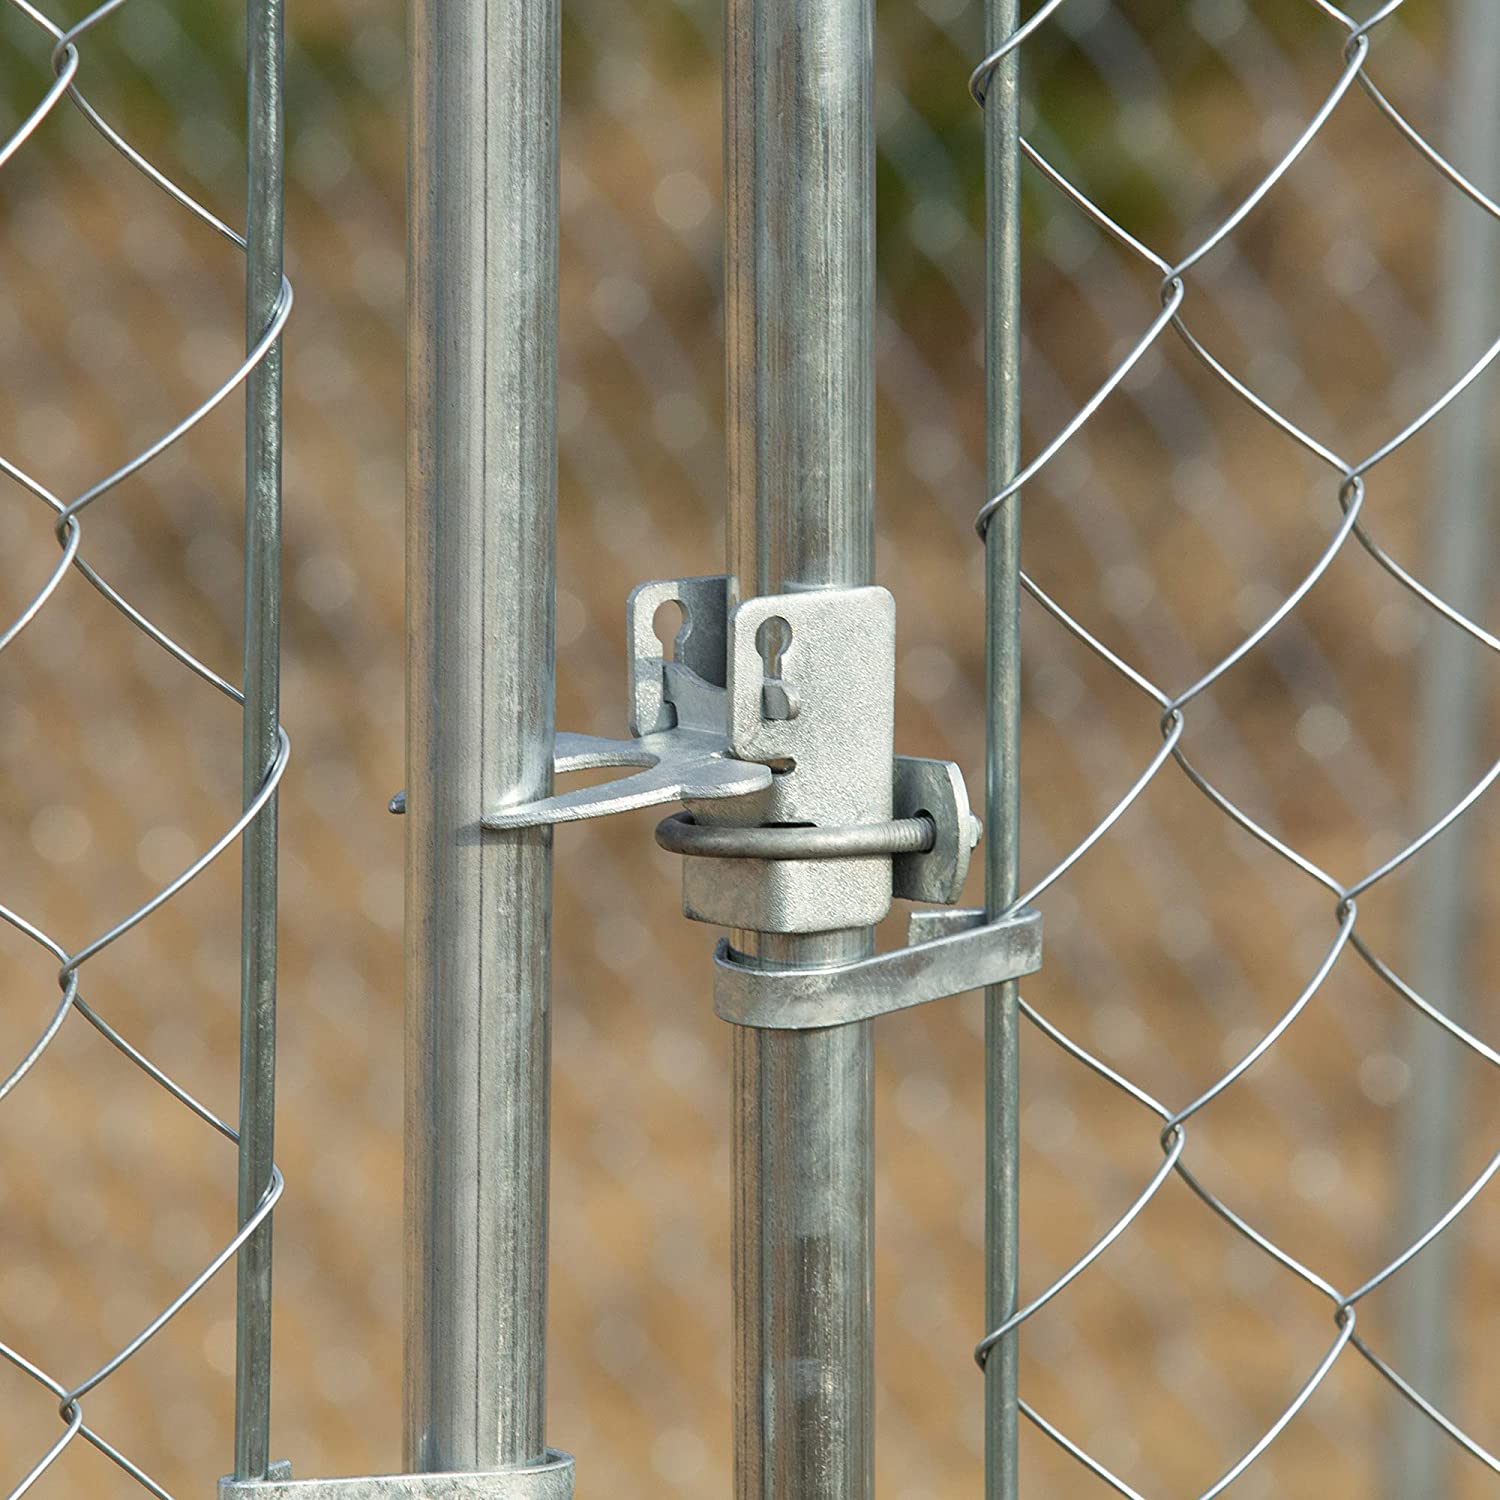 Where you can use chain link fence?